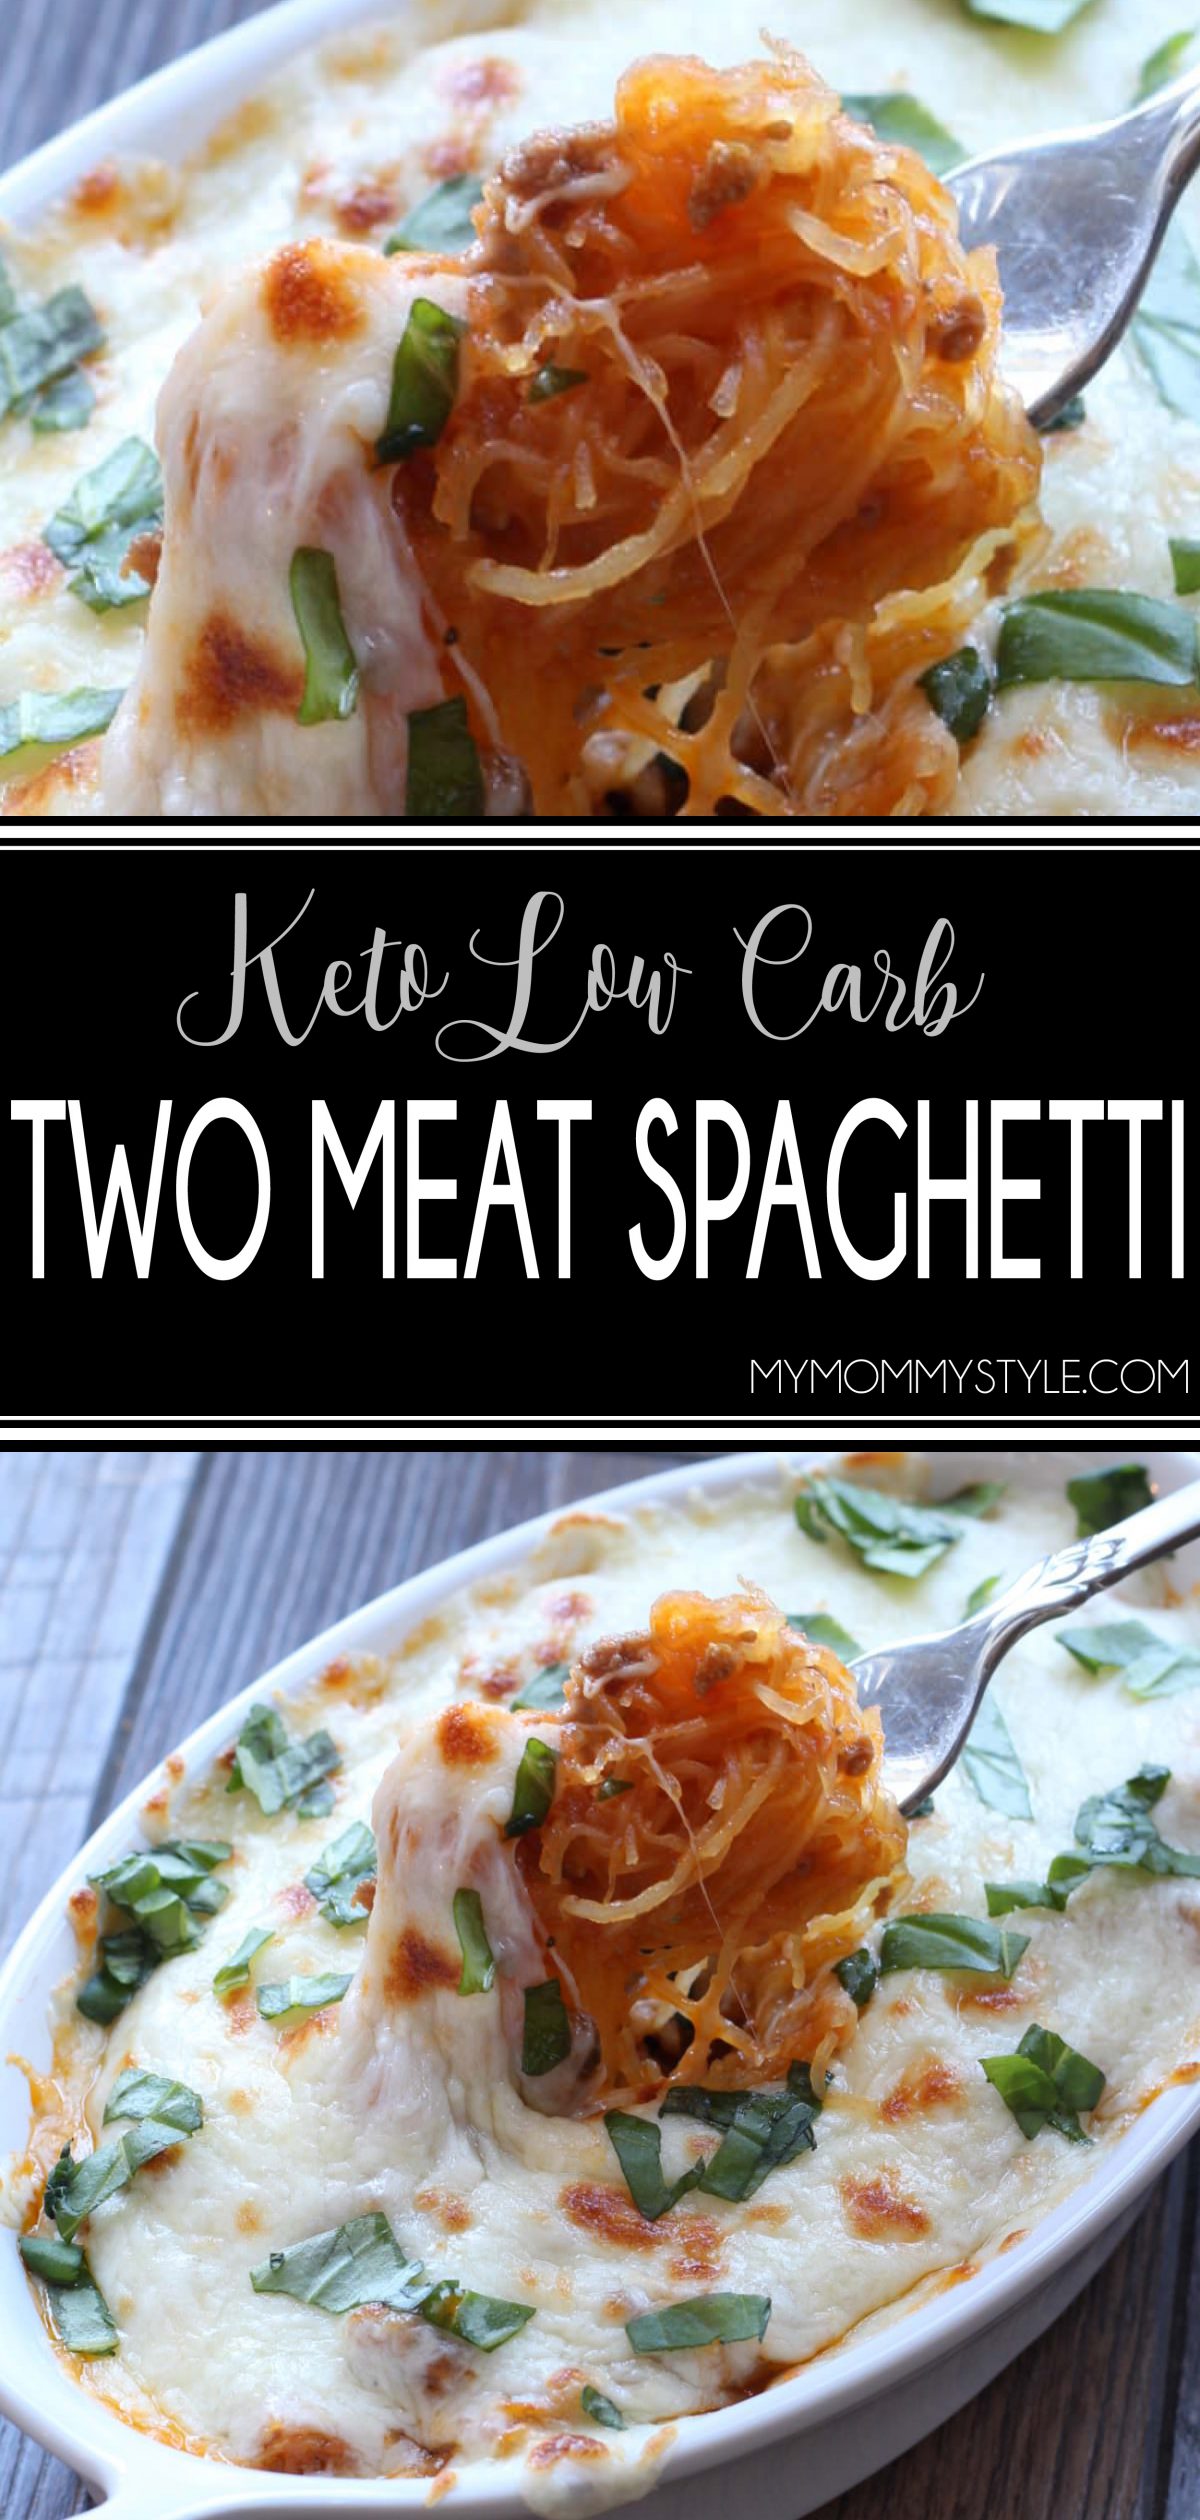 Keto Low Carb Two Meat Spaghetti - My Mommy Style